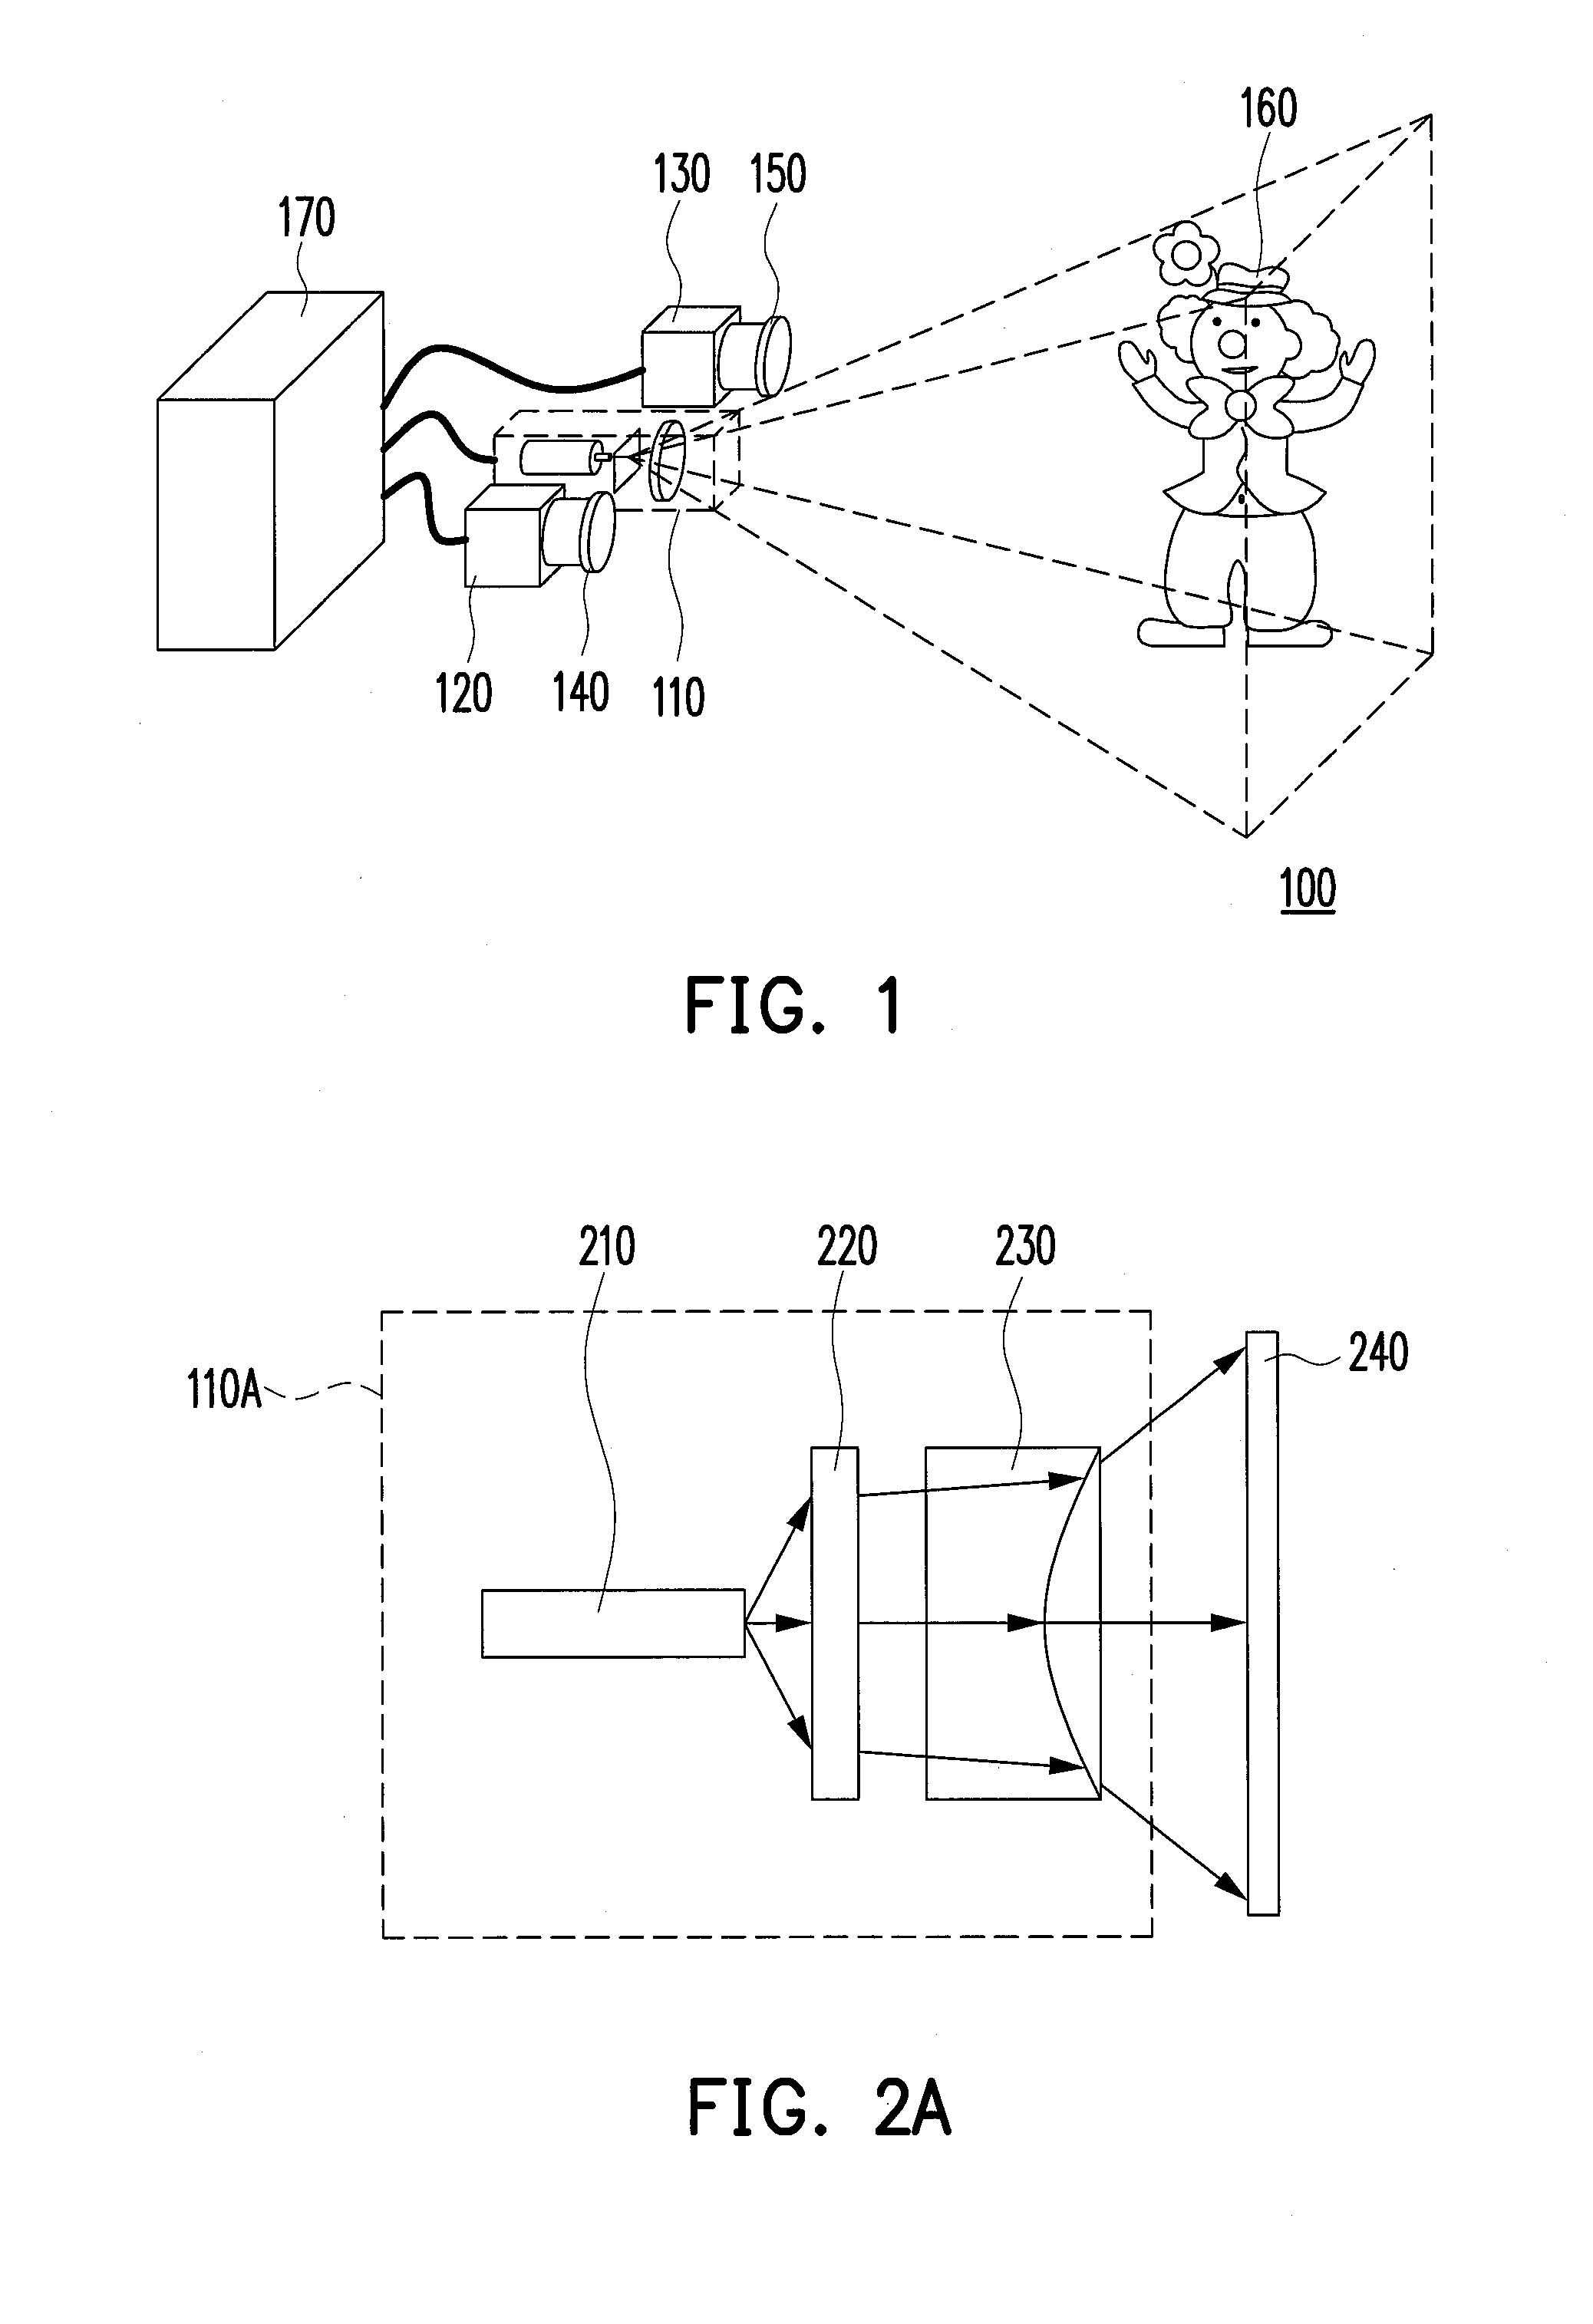 Depth image acquiring device, system and method